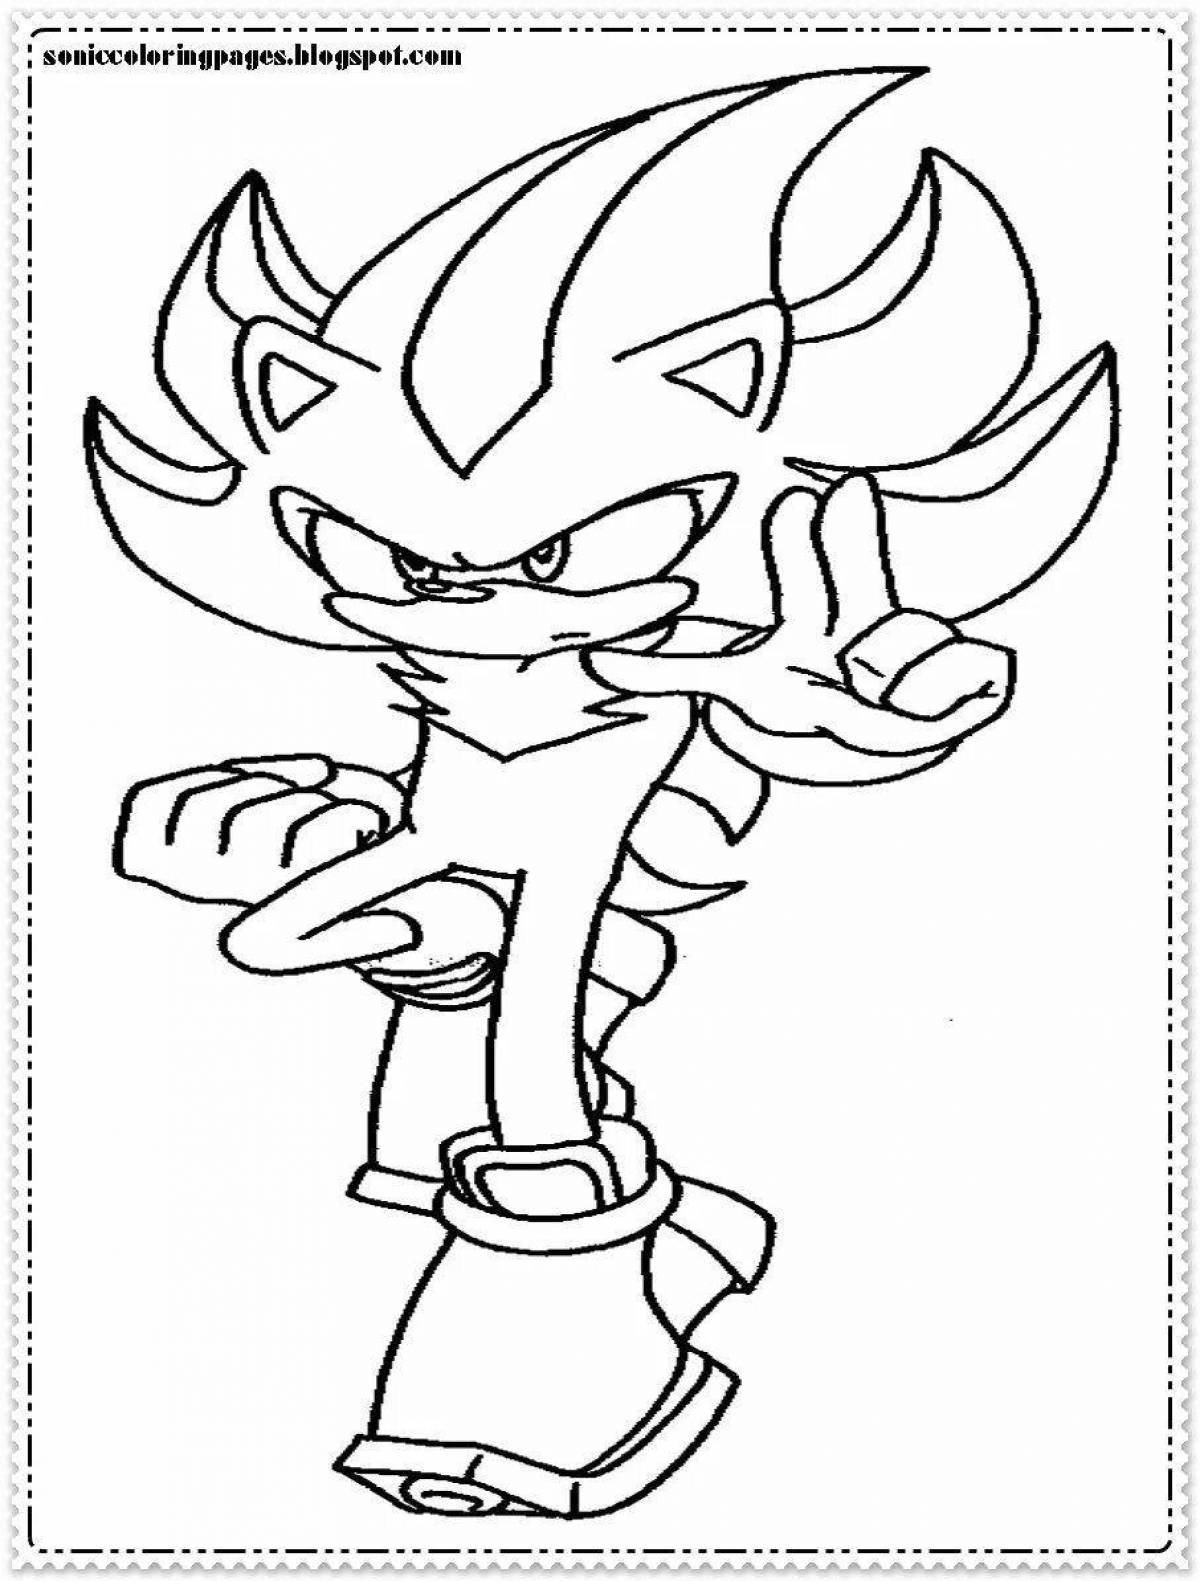 Hypnotic sonic shredder coloring page